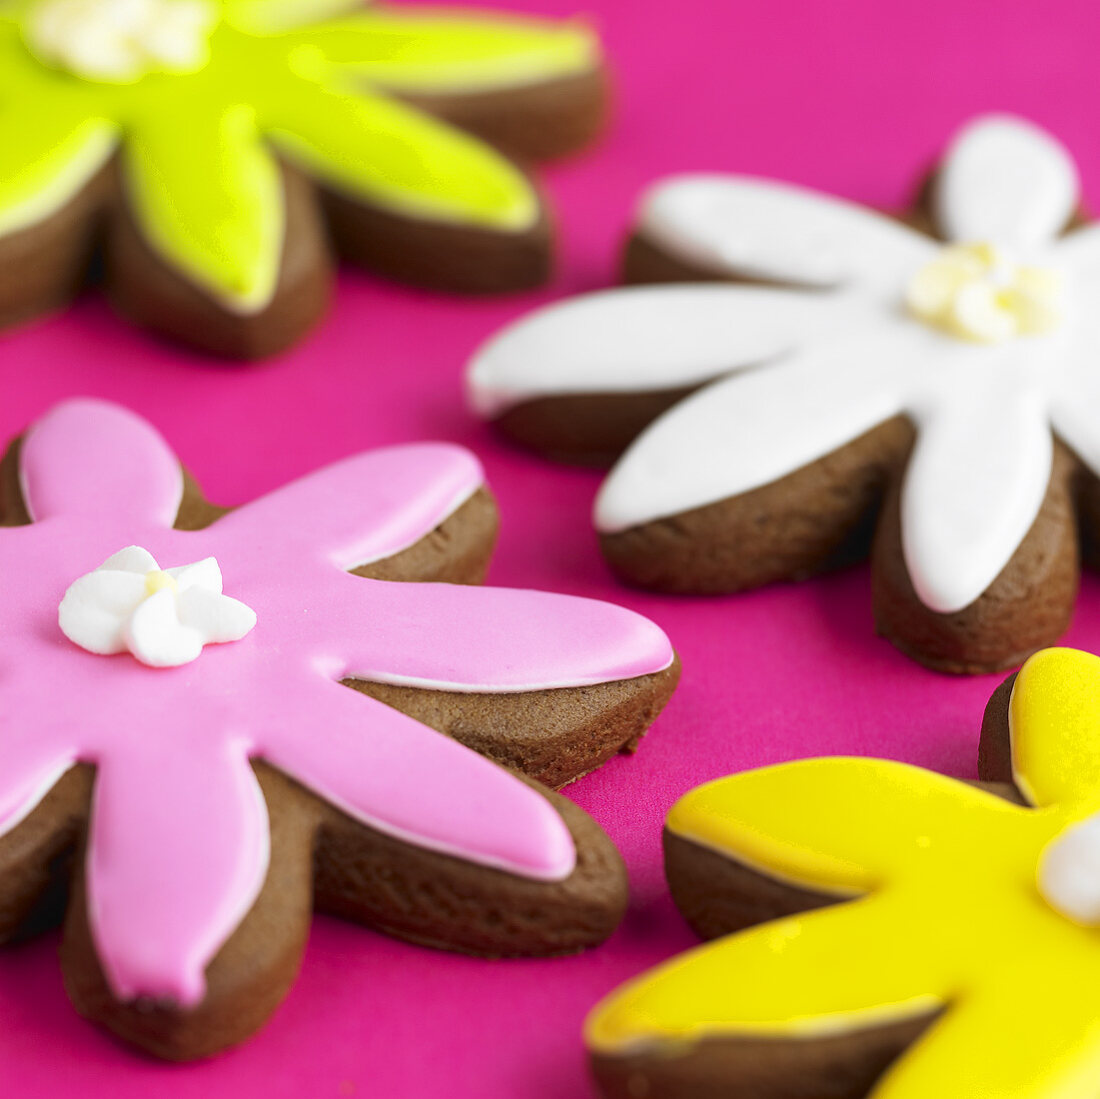 Iced flower biscuits